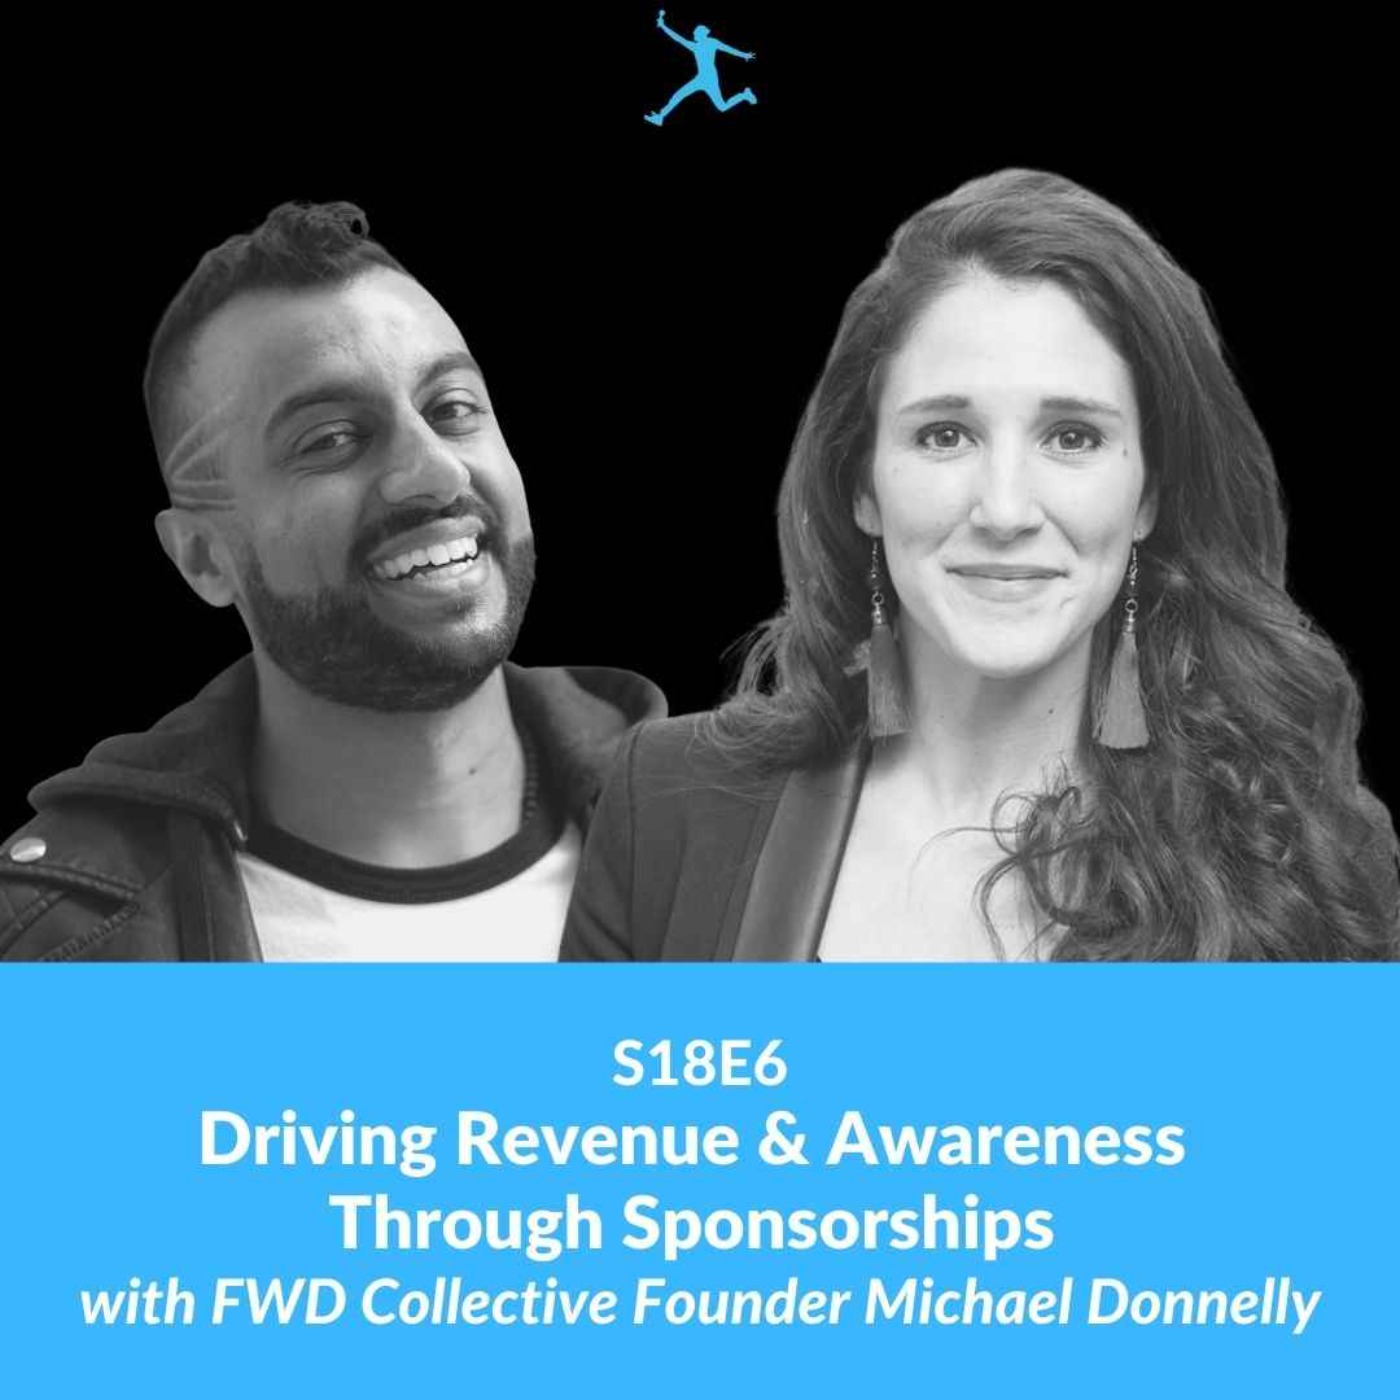 S18E6: Driving Revenue & Awareness Through Sponsorships with FWD Collective Founder Michael Donnelly